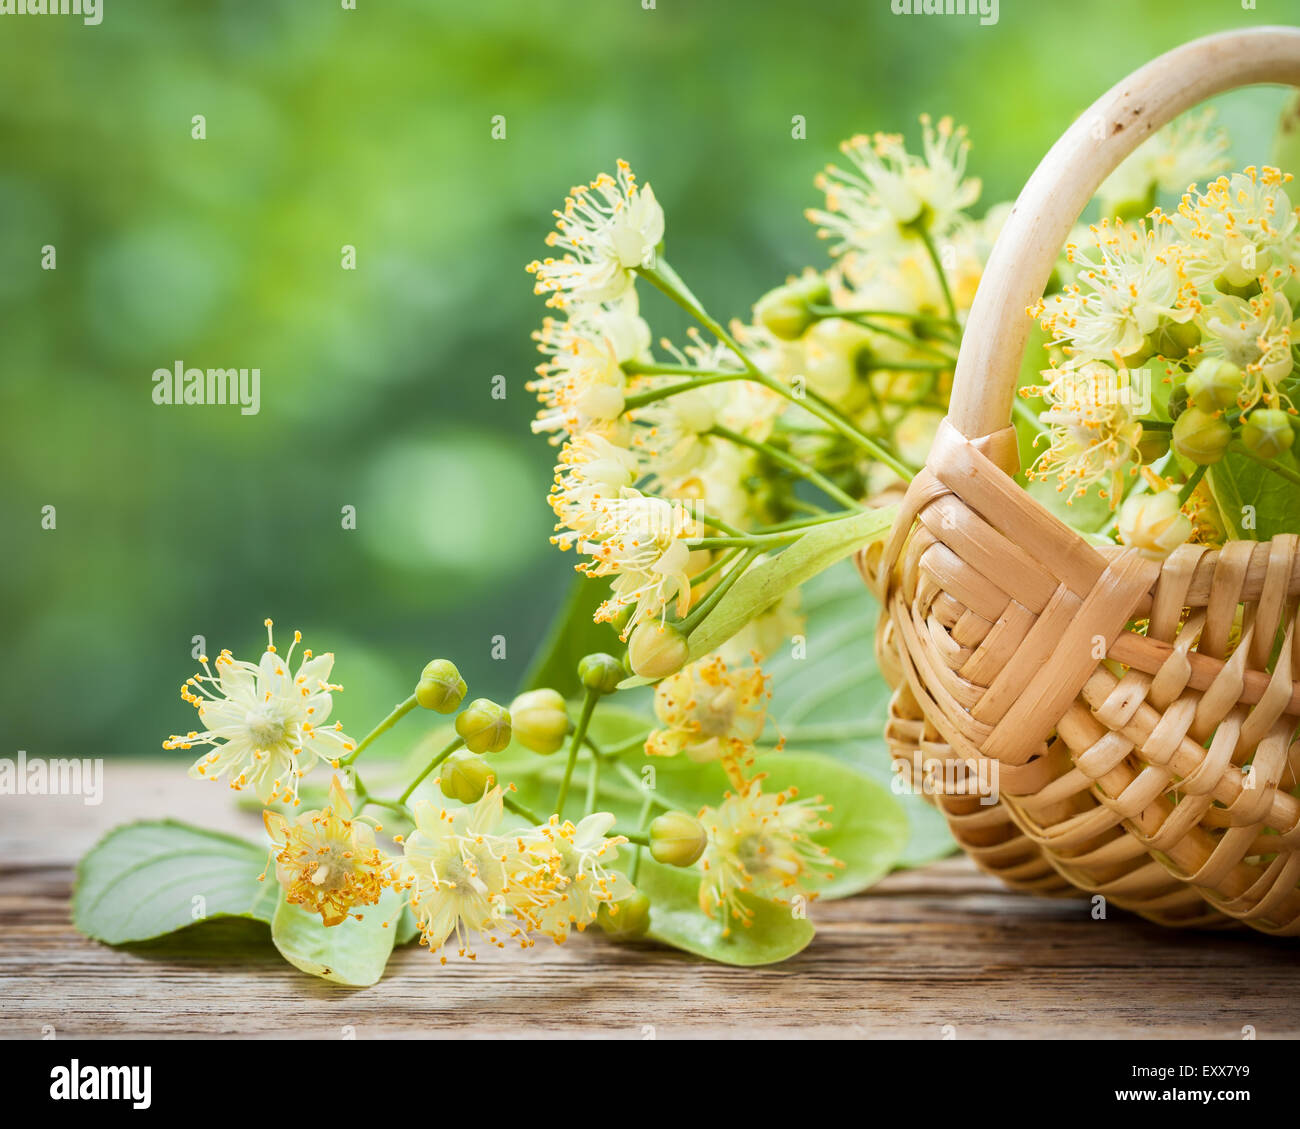 Wicker basket with lime flowers, herbal medicine. Stock Photo